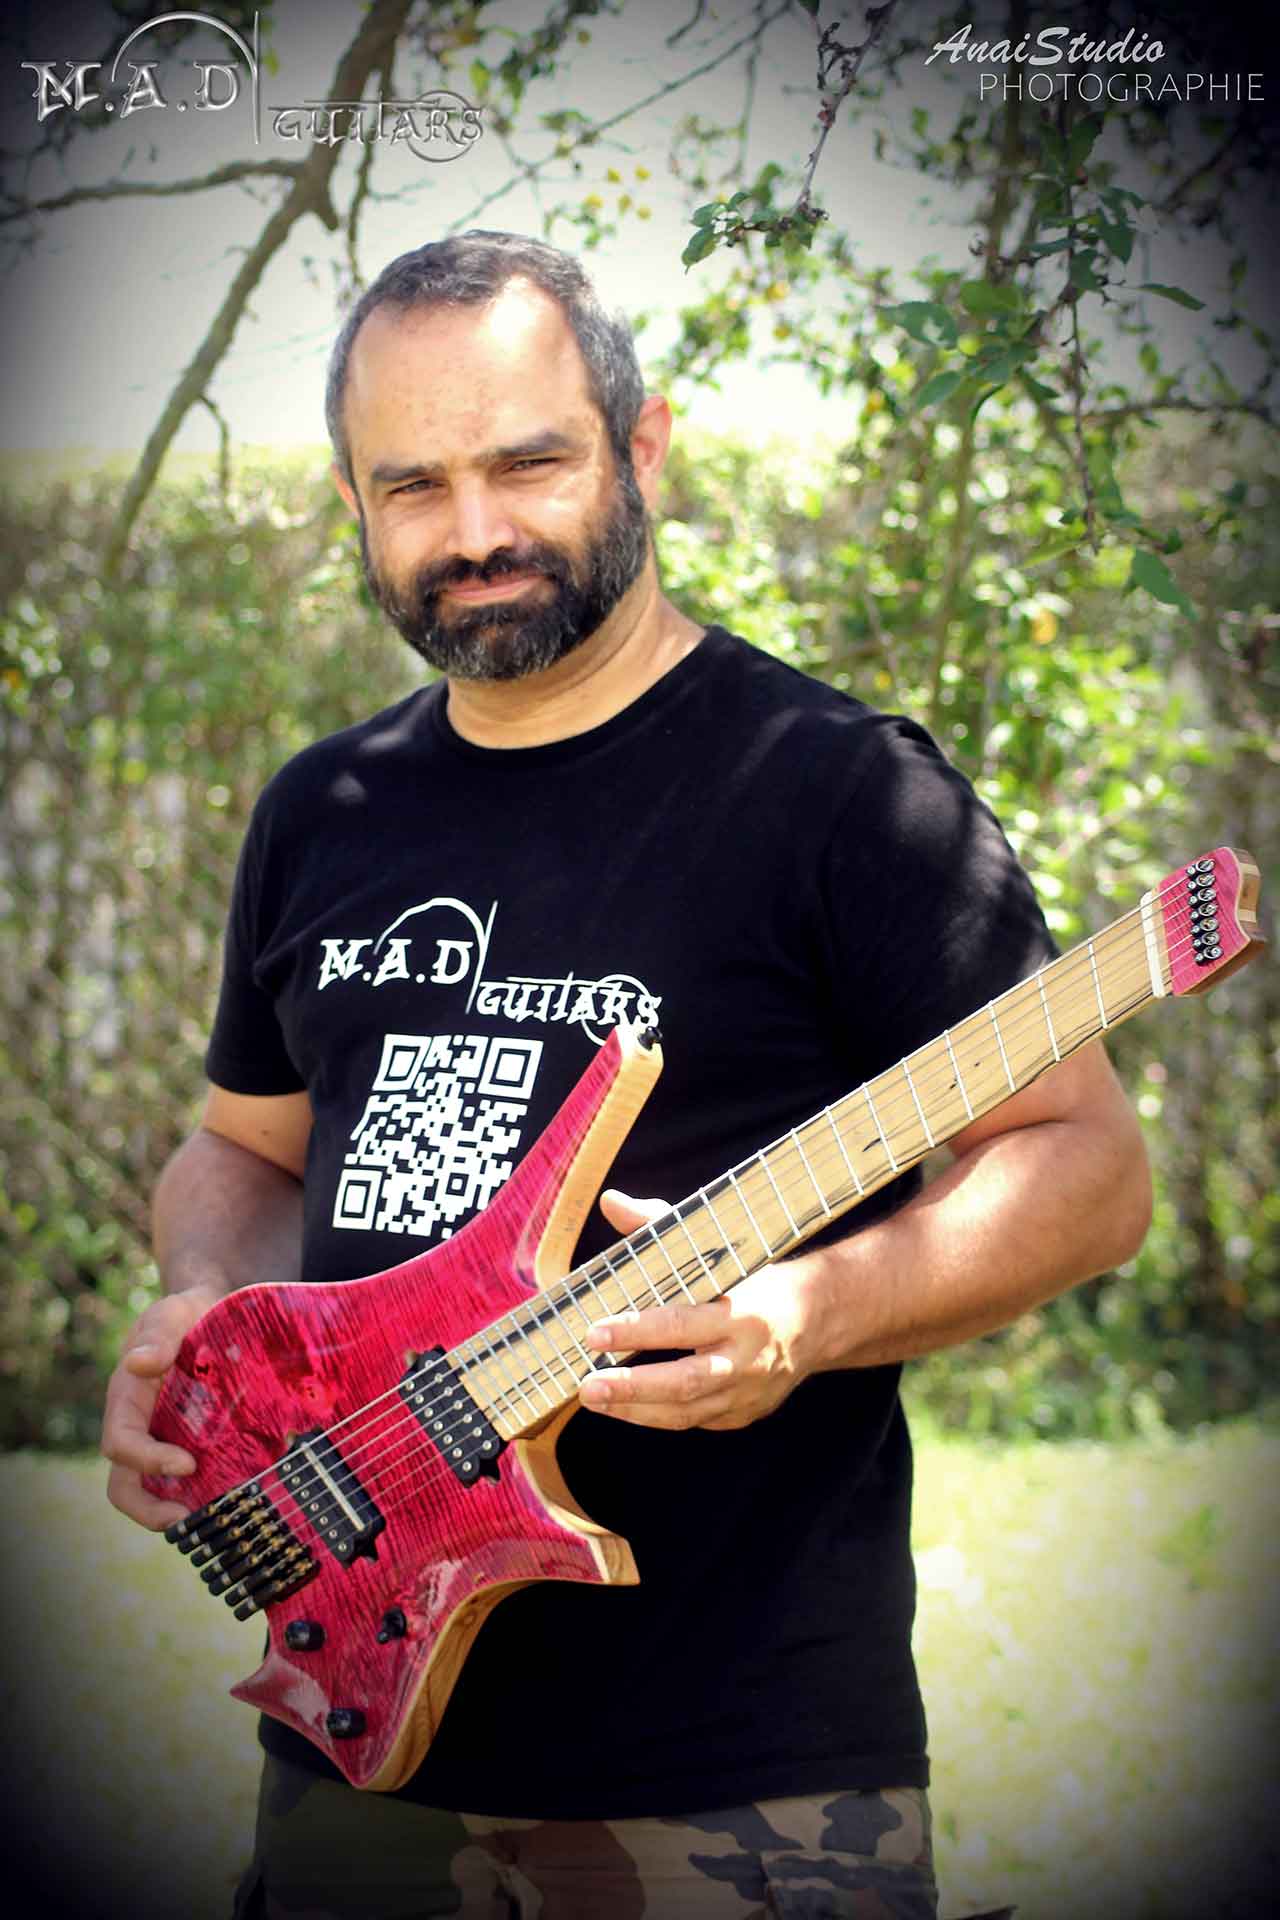 Mad Guitars Interview 1 Background & Flagship models